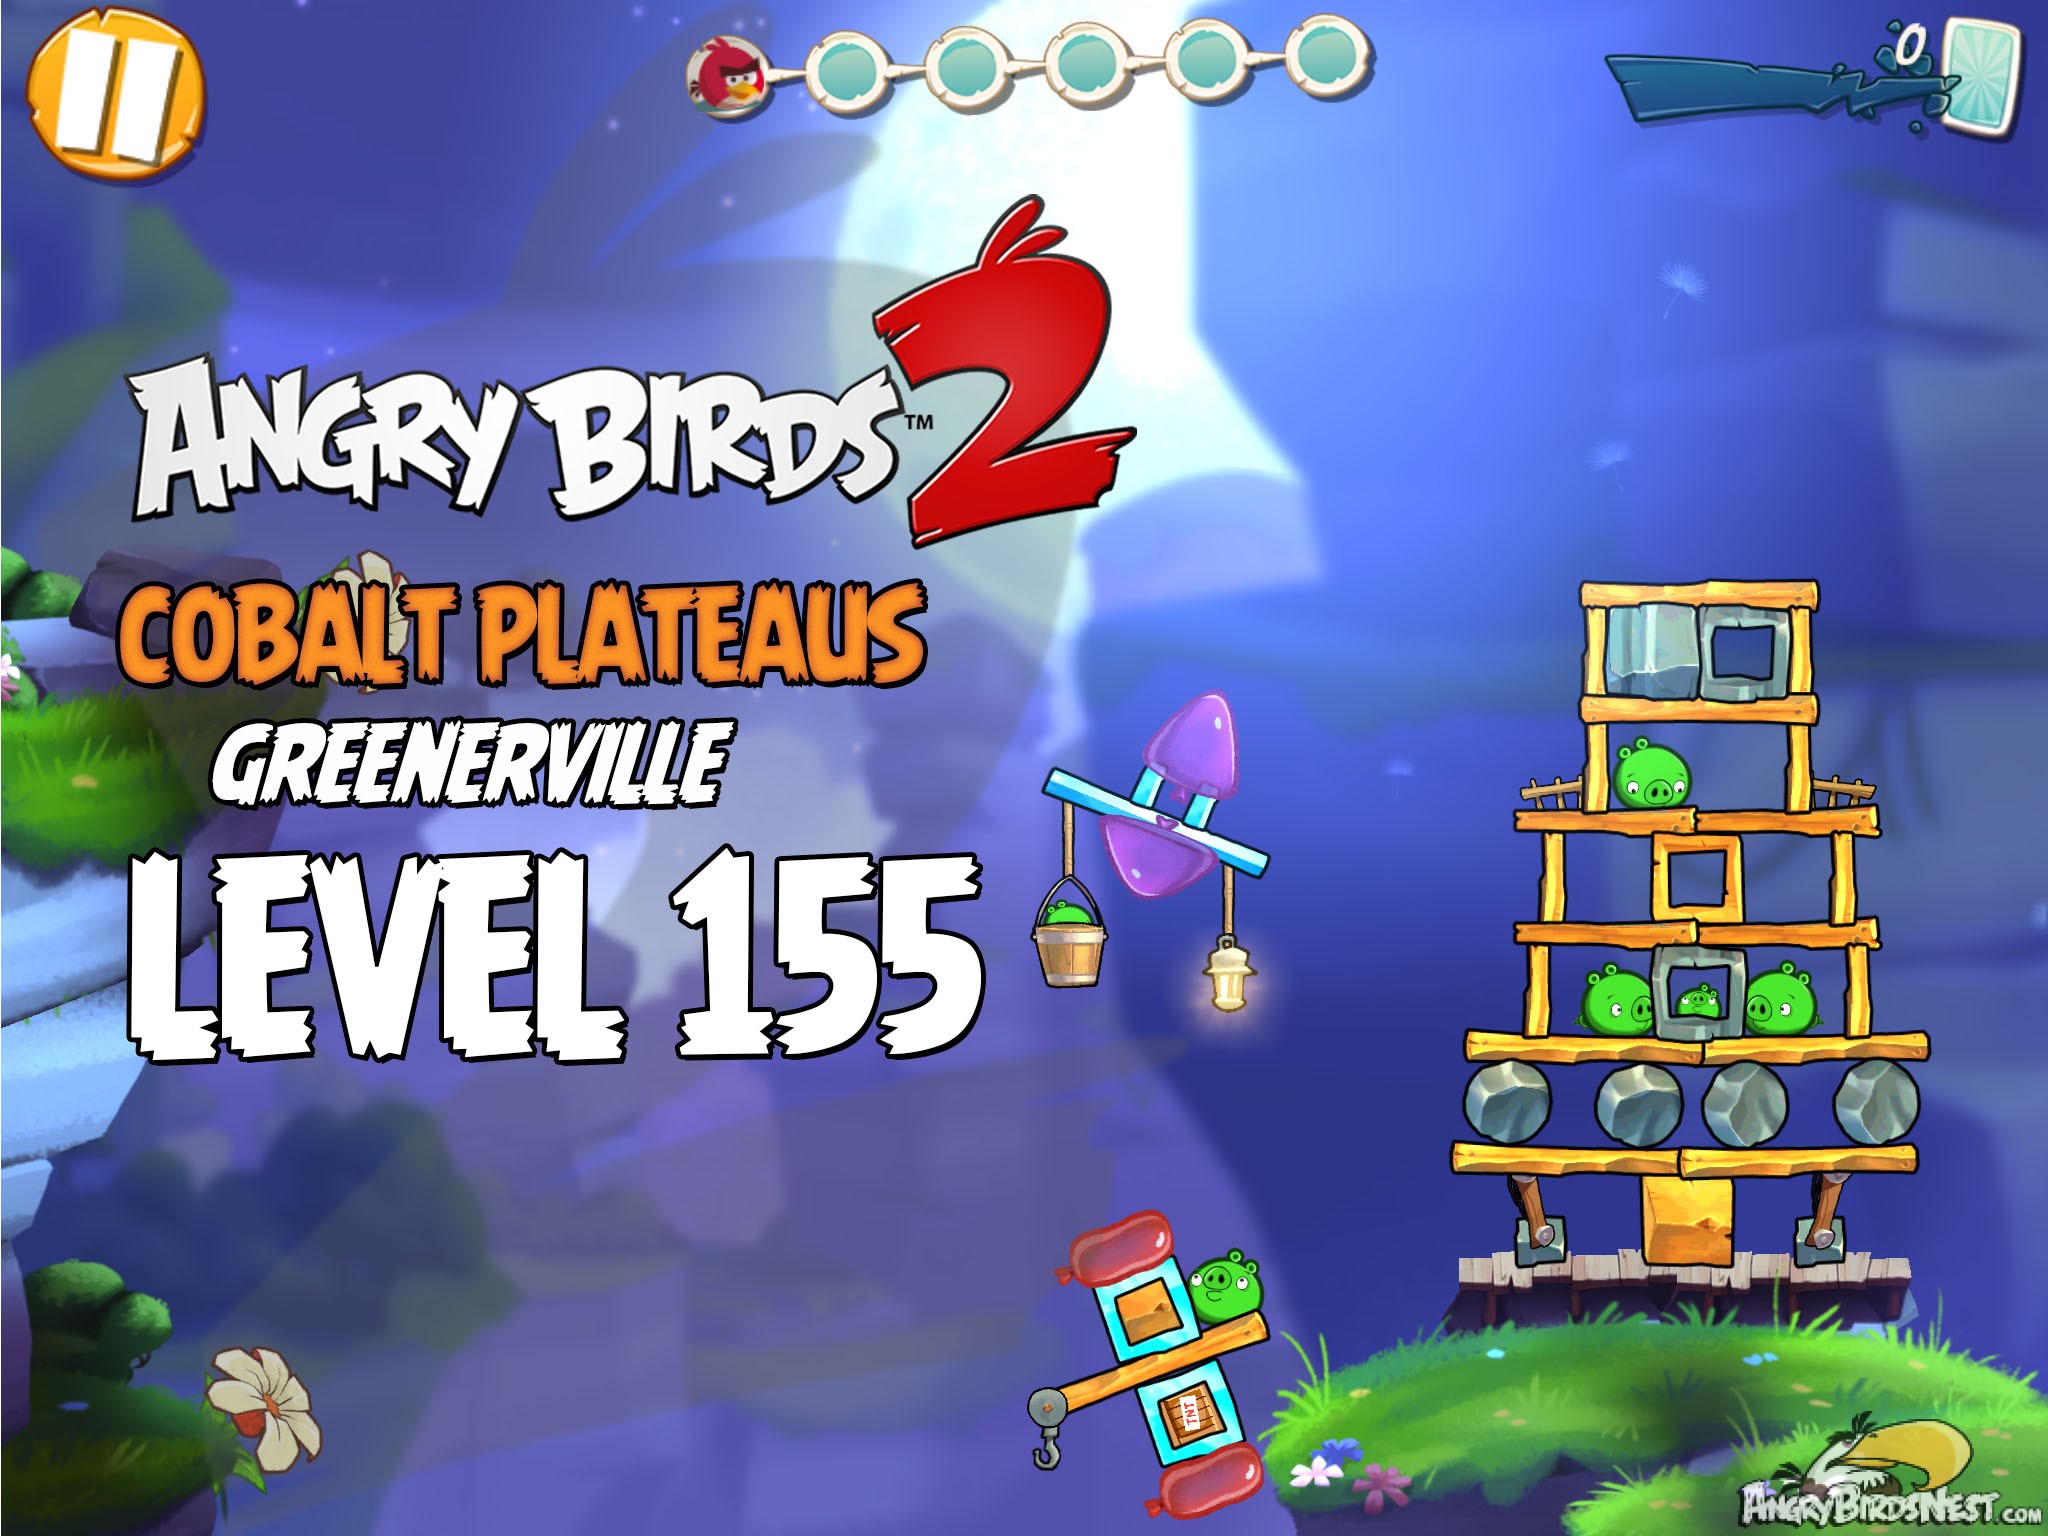 Angry Birds 2 Cobalt Plateaus Greenerville Level 155